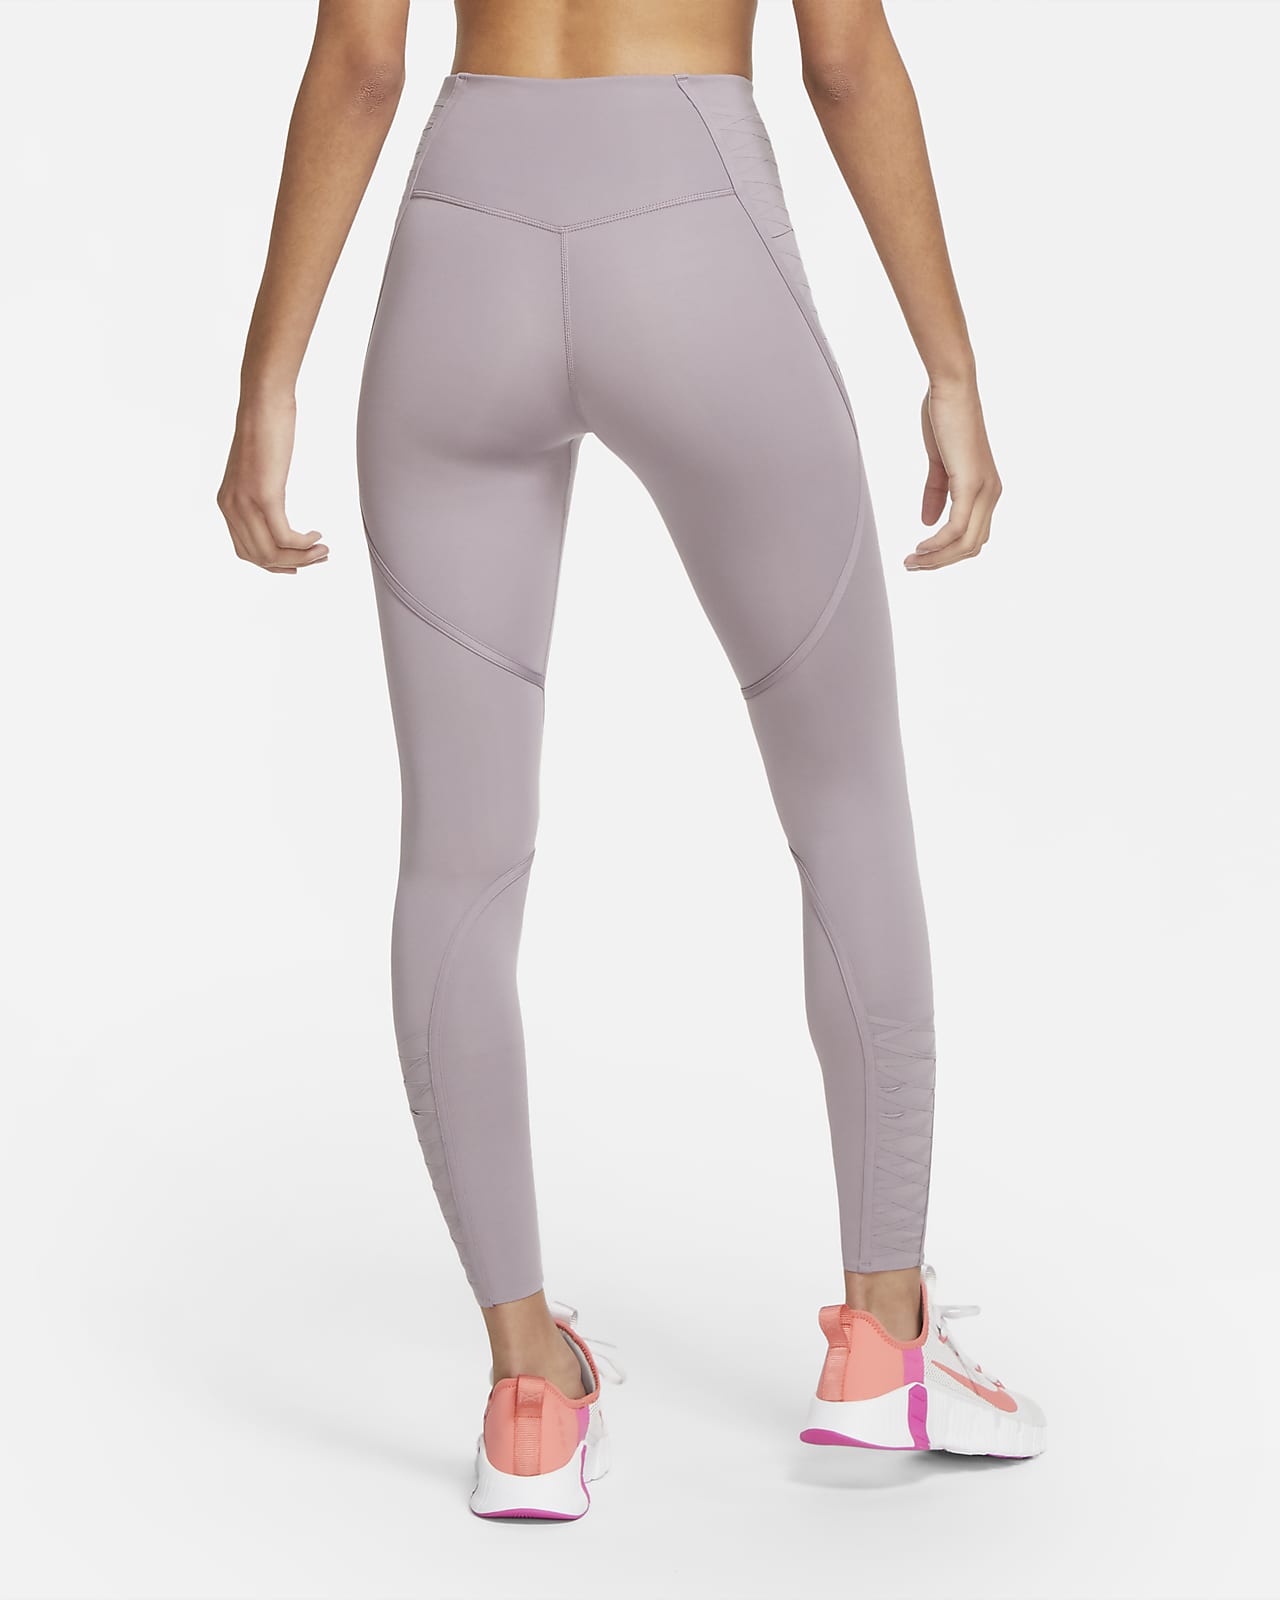 nike one luxe leggings review